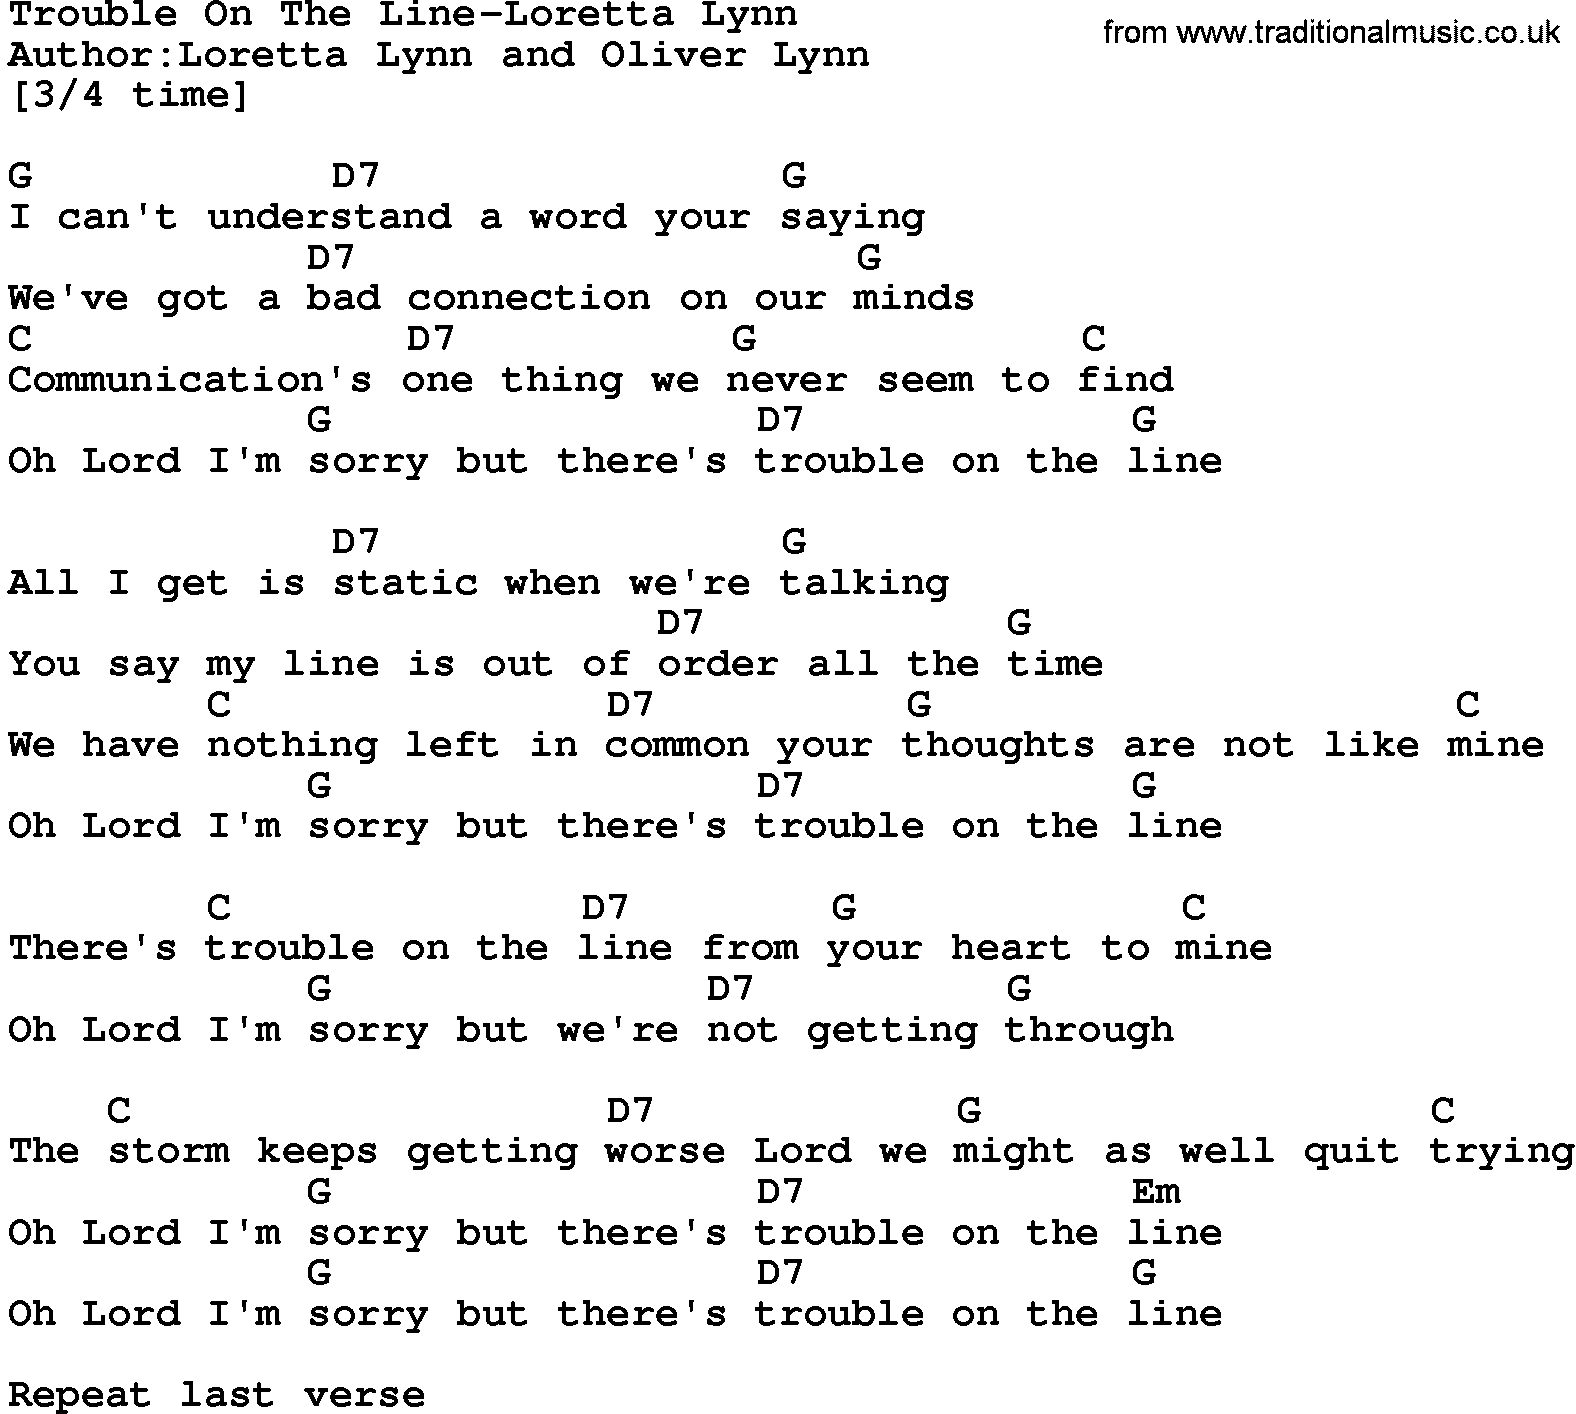 Country music song: Trouble On The Line-Loretta Lynn lyrics and chords